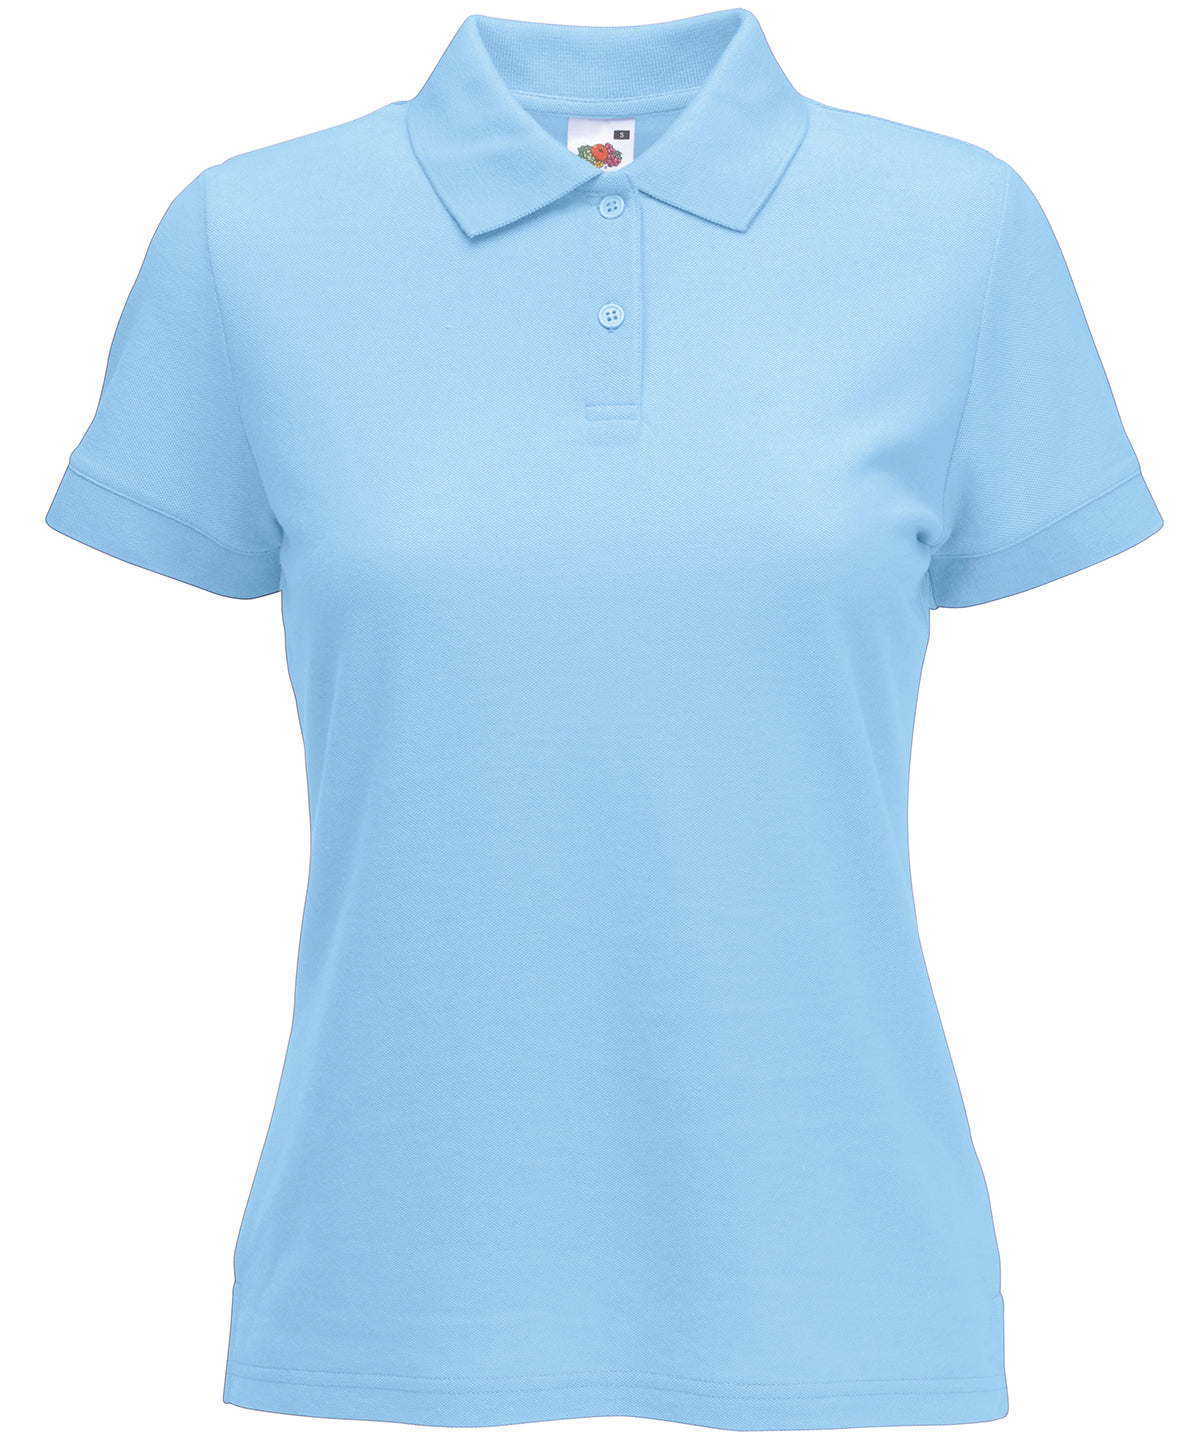 Sky Blue - Women's 65/35 polo Polos Fruit of the Loom Fruit of the Loom Polos, Must Haves, Polos & Casual, Polos safe to wash at 60 degrees, Women's Fashion Schoolwear Centres